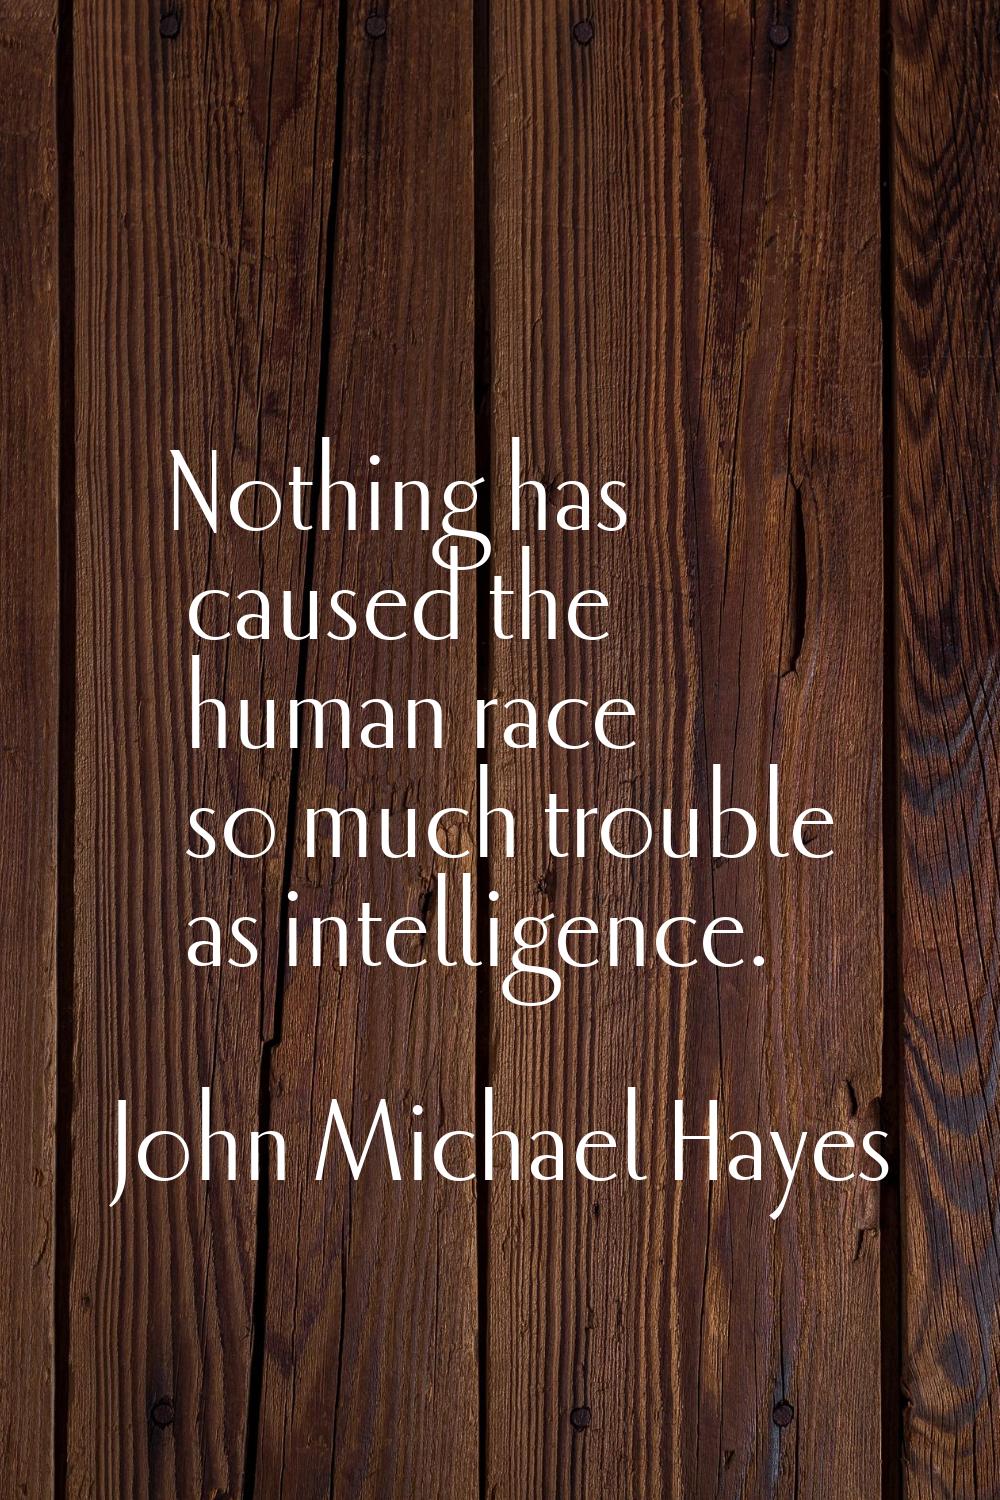 Nothing has caused the human race so much trouble as intelligence.